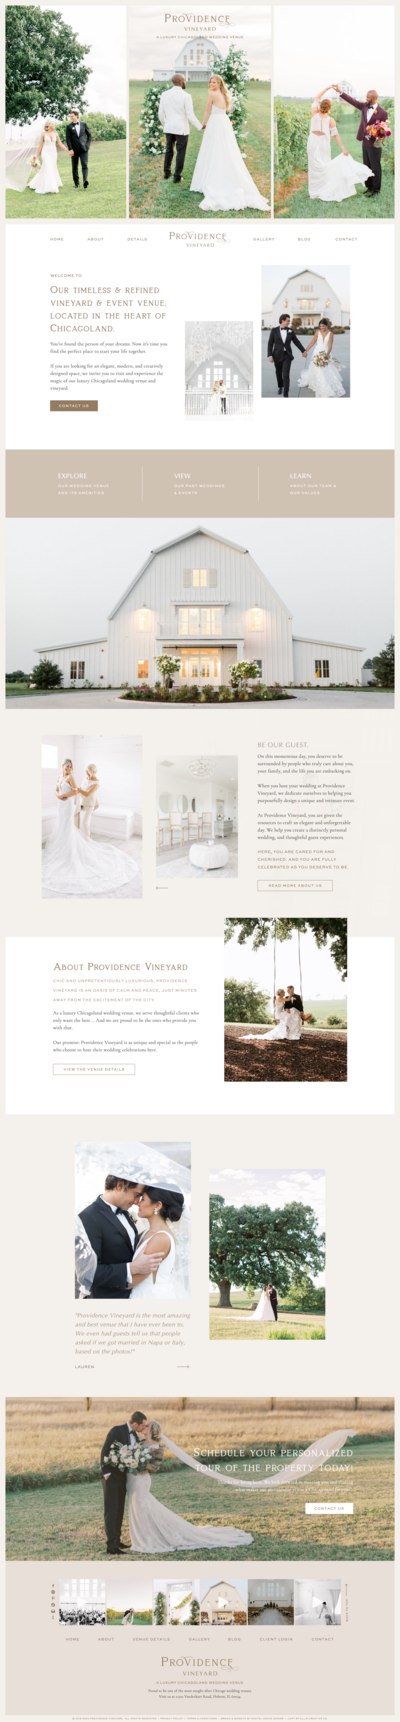 Showit template customization for Providence Vineyard, a Chicagoland wedding venue